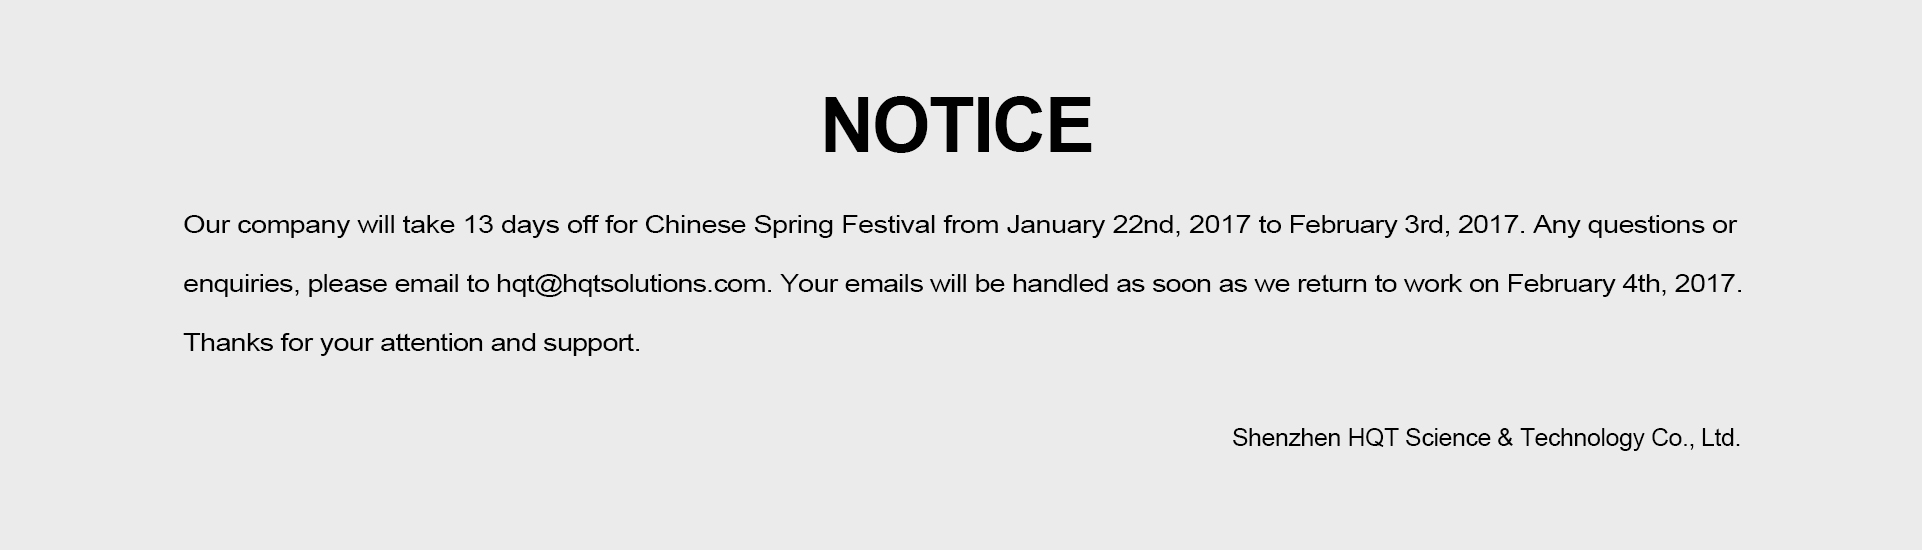 Notice of Holiday for Chinese Spring Festival